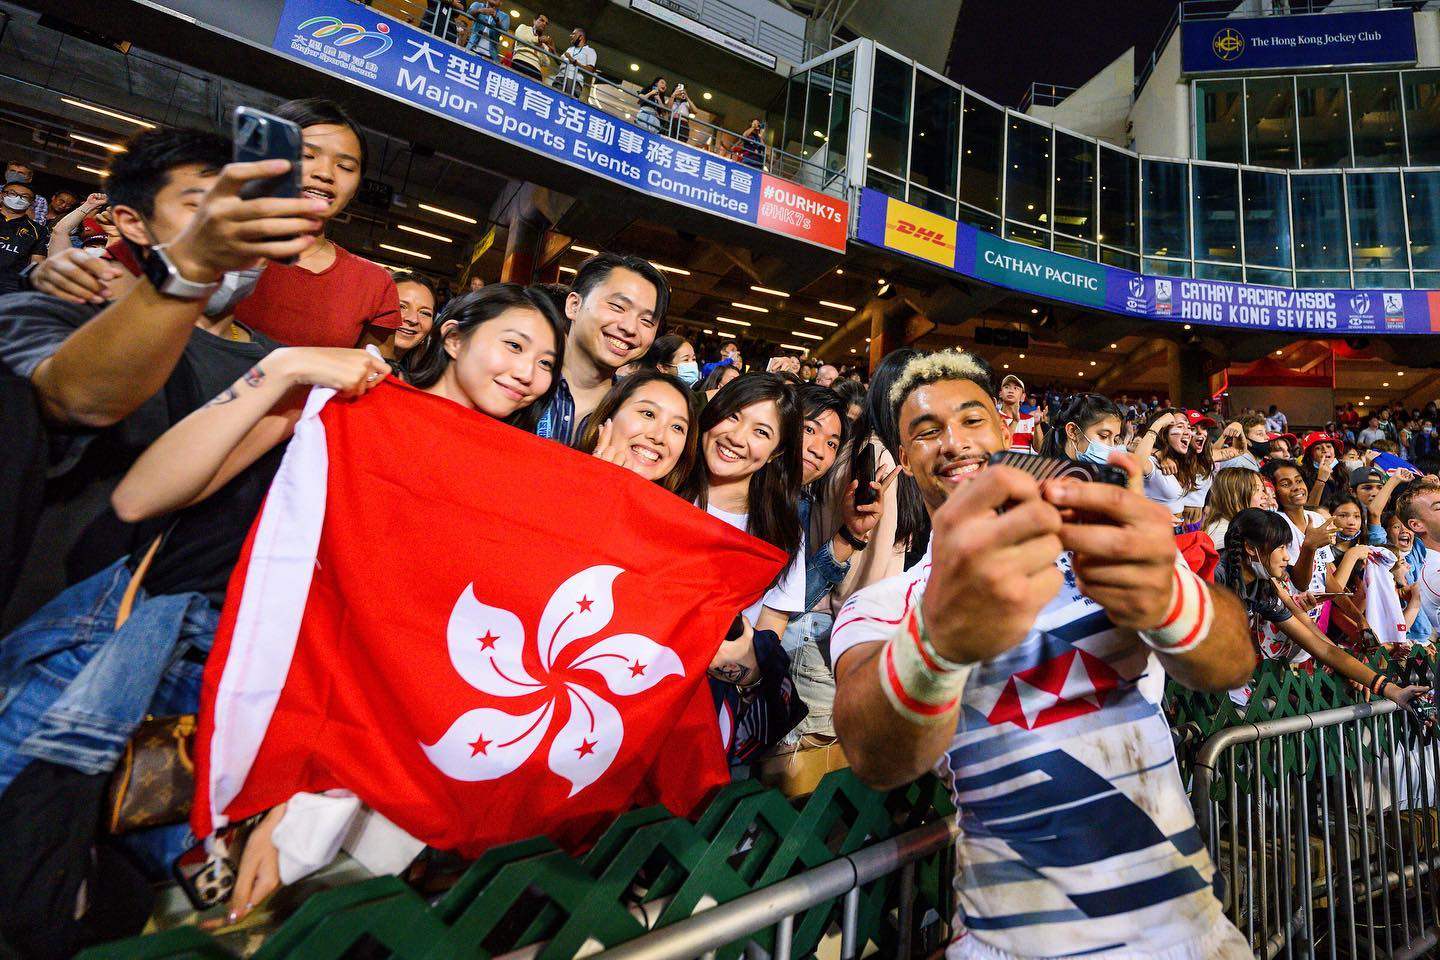 More than 20,000 rugby sevens fans watched three days of action in Hong Kong during last November. Photo: Handout